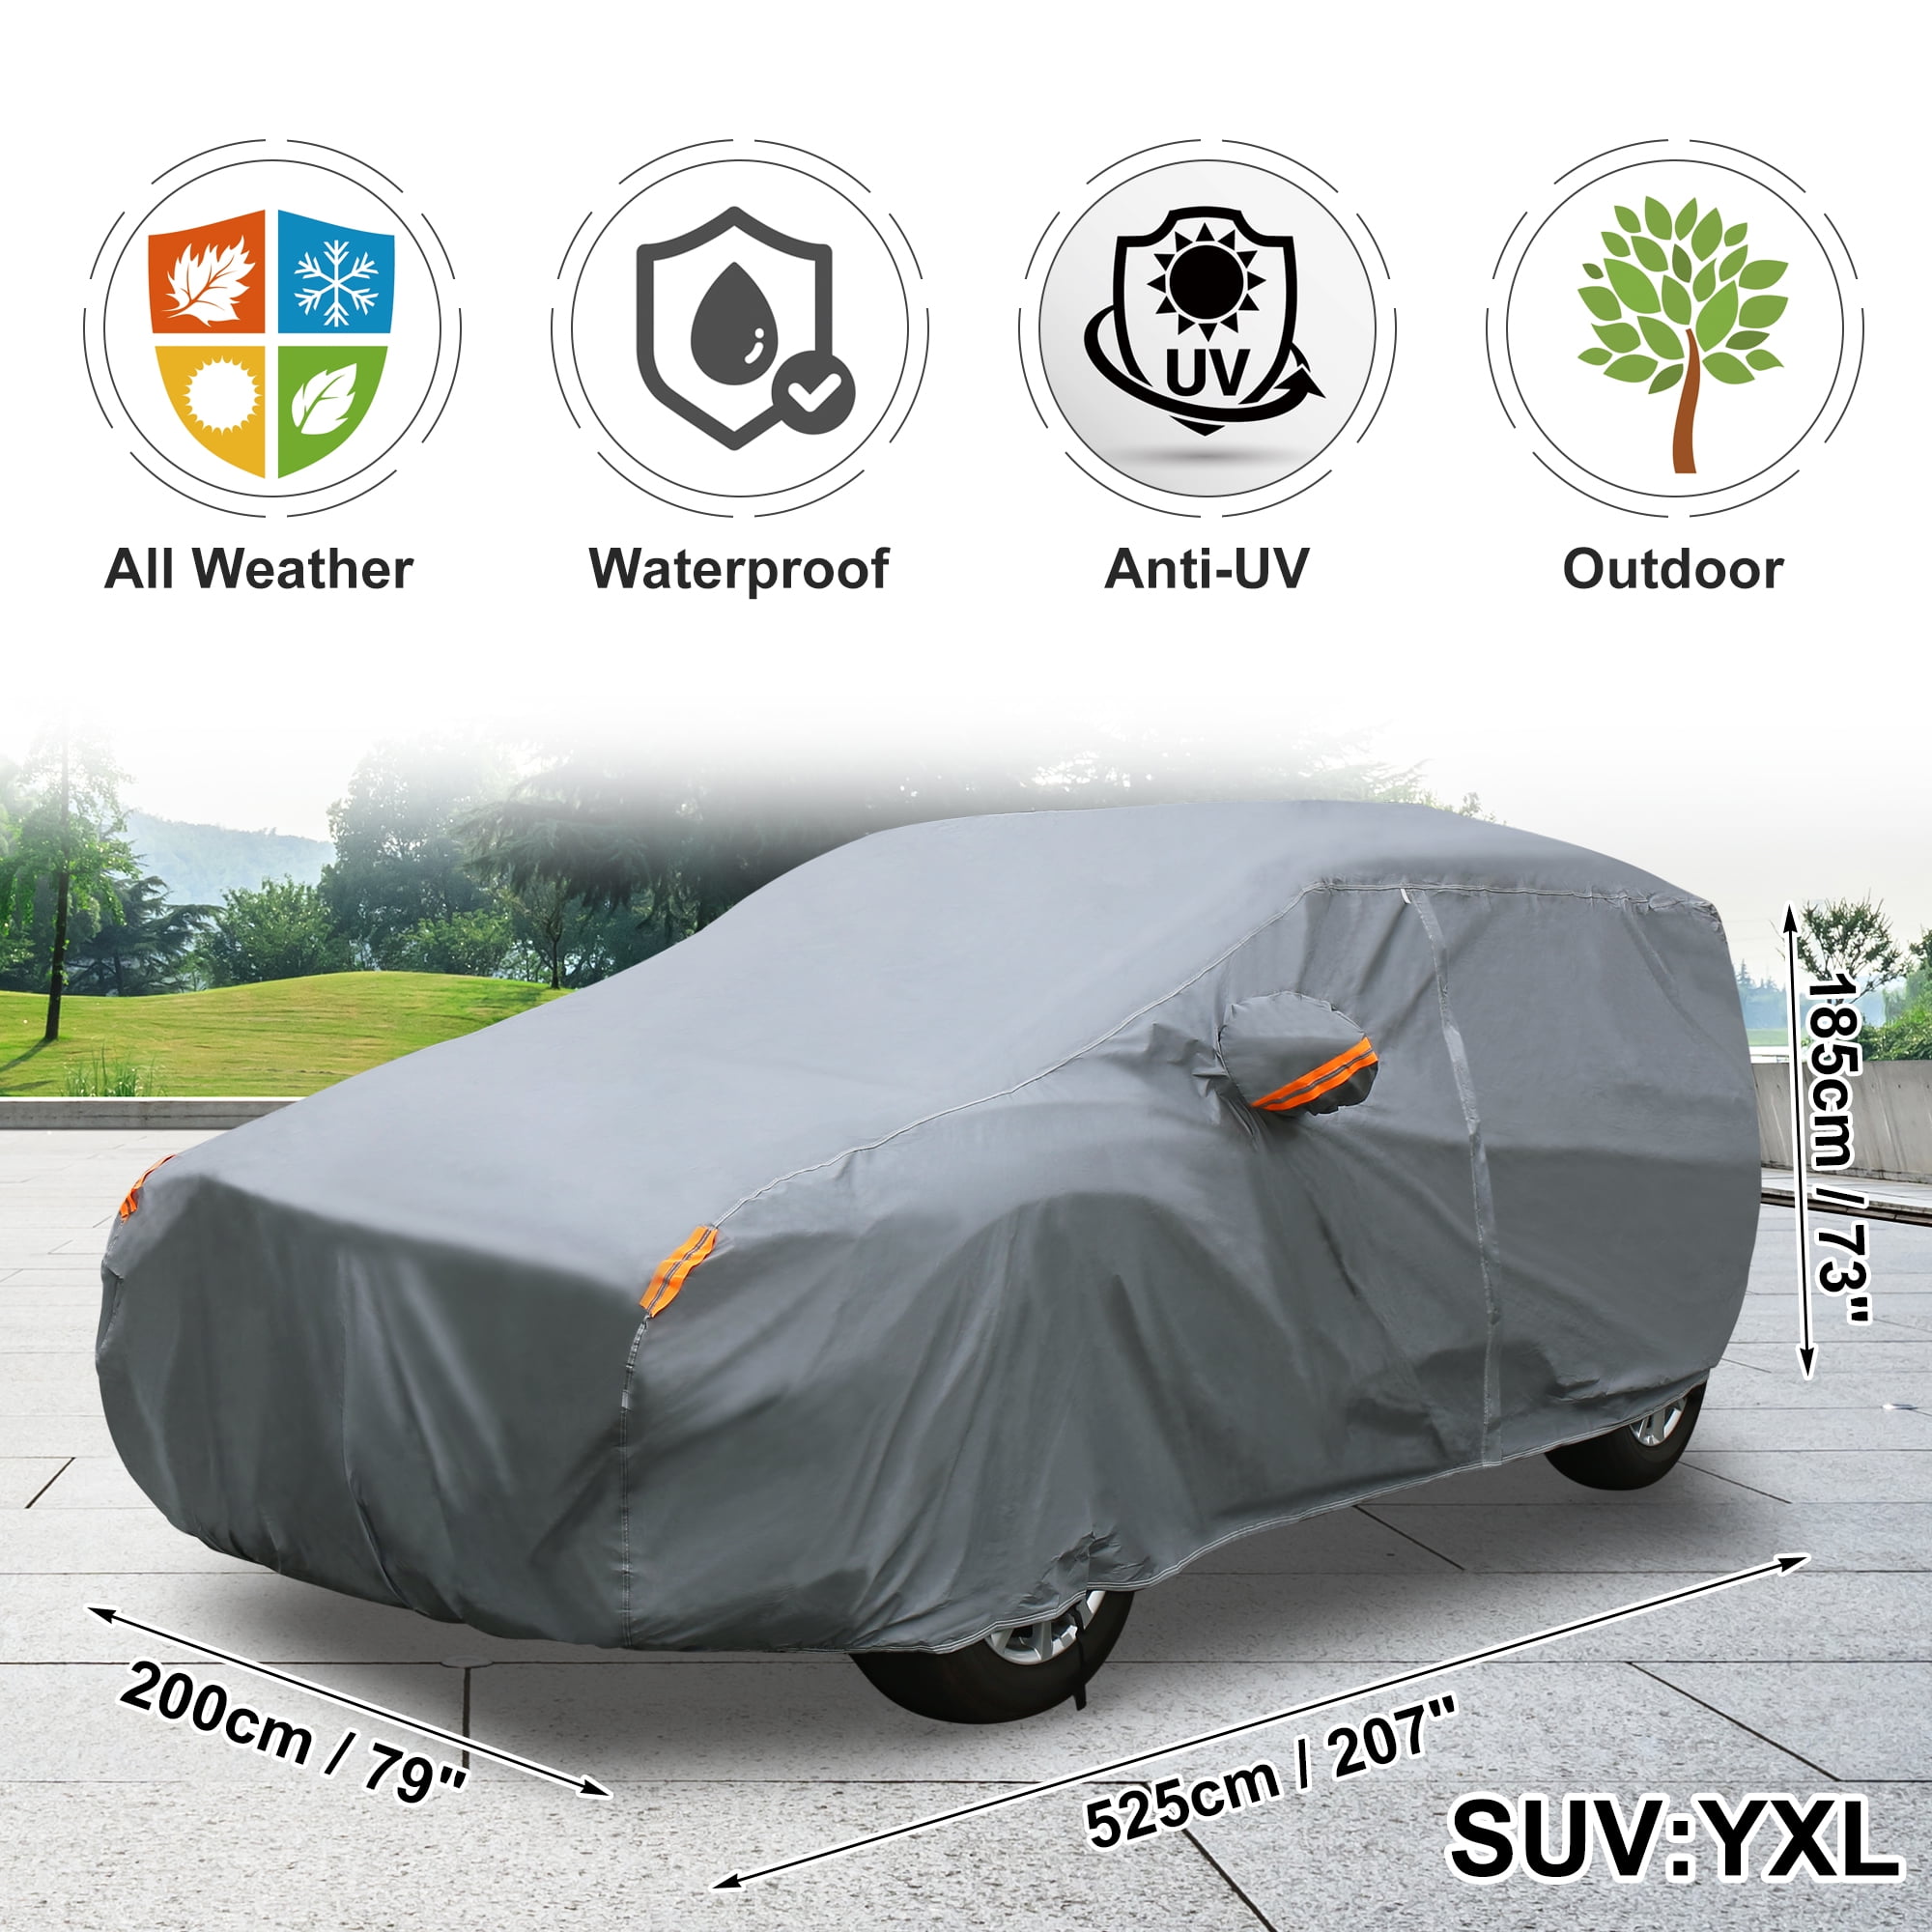 Car Cover Waterproof for Peugeot 3008 208 207, Car Covers Breathable Large,  Full Car Cover, Oxford